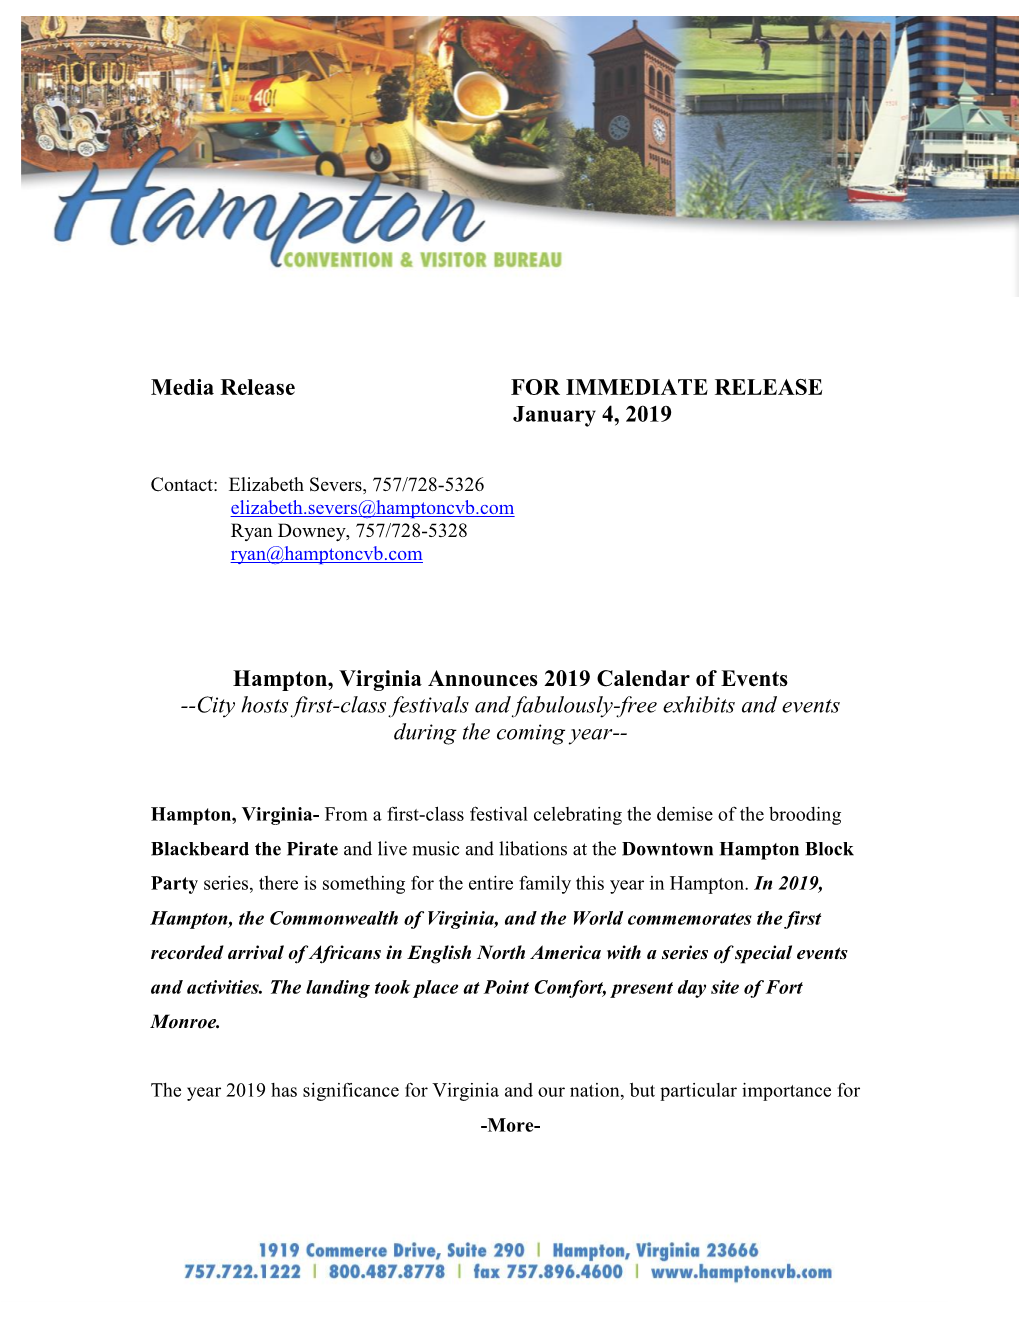 Hampton, Virginia Announces 2019 Calendar of Events --City Hosts First-Class Festivals and Fabulously-Free Exhibits and Events During the Coming Year